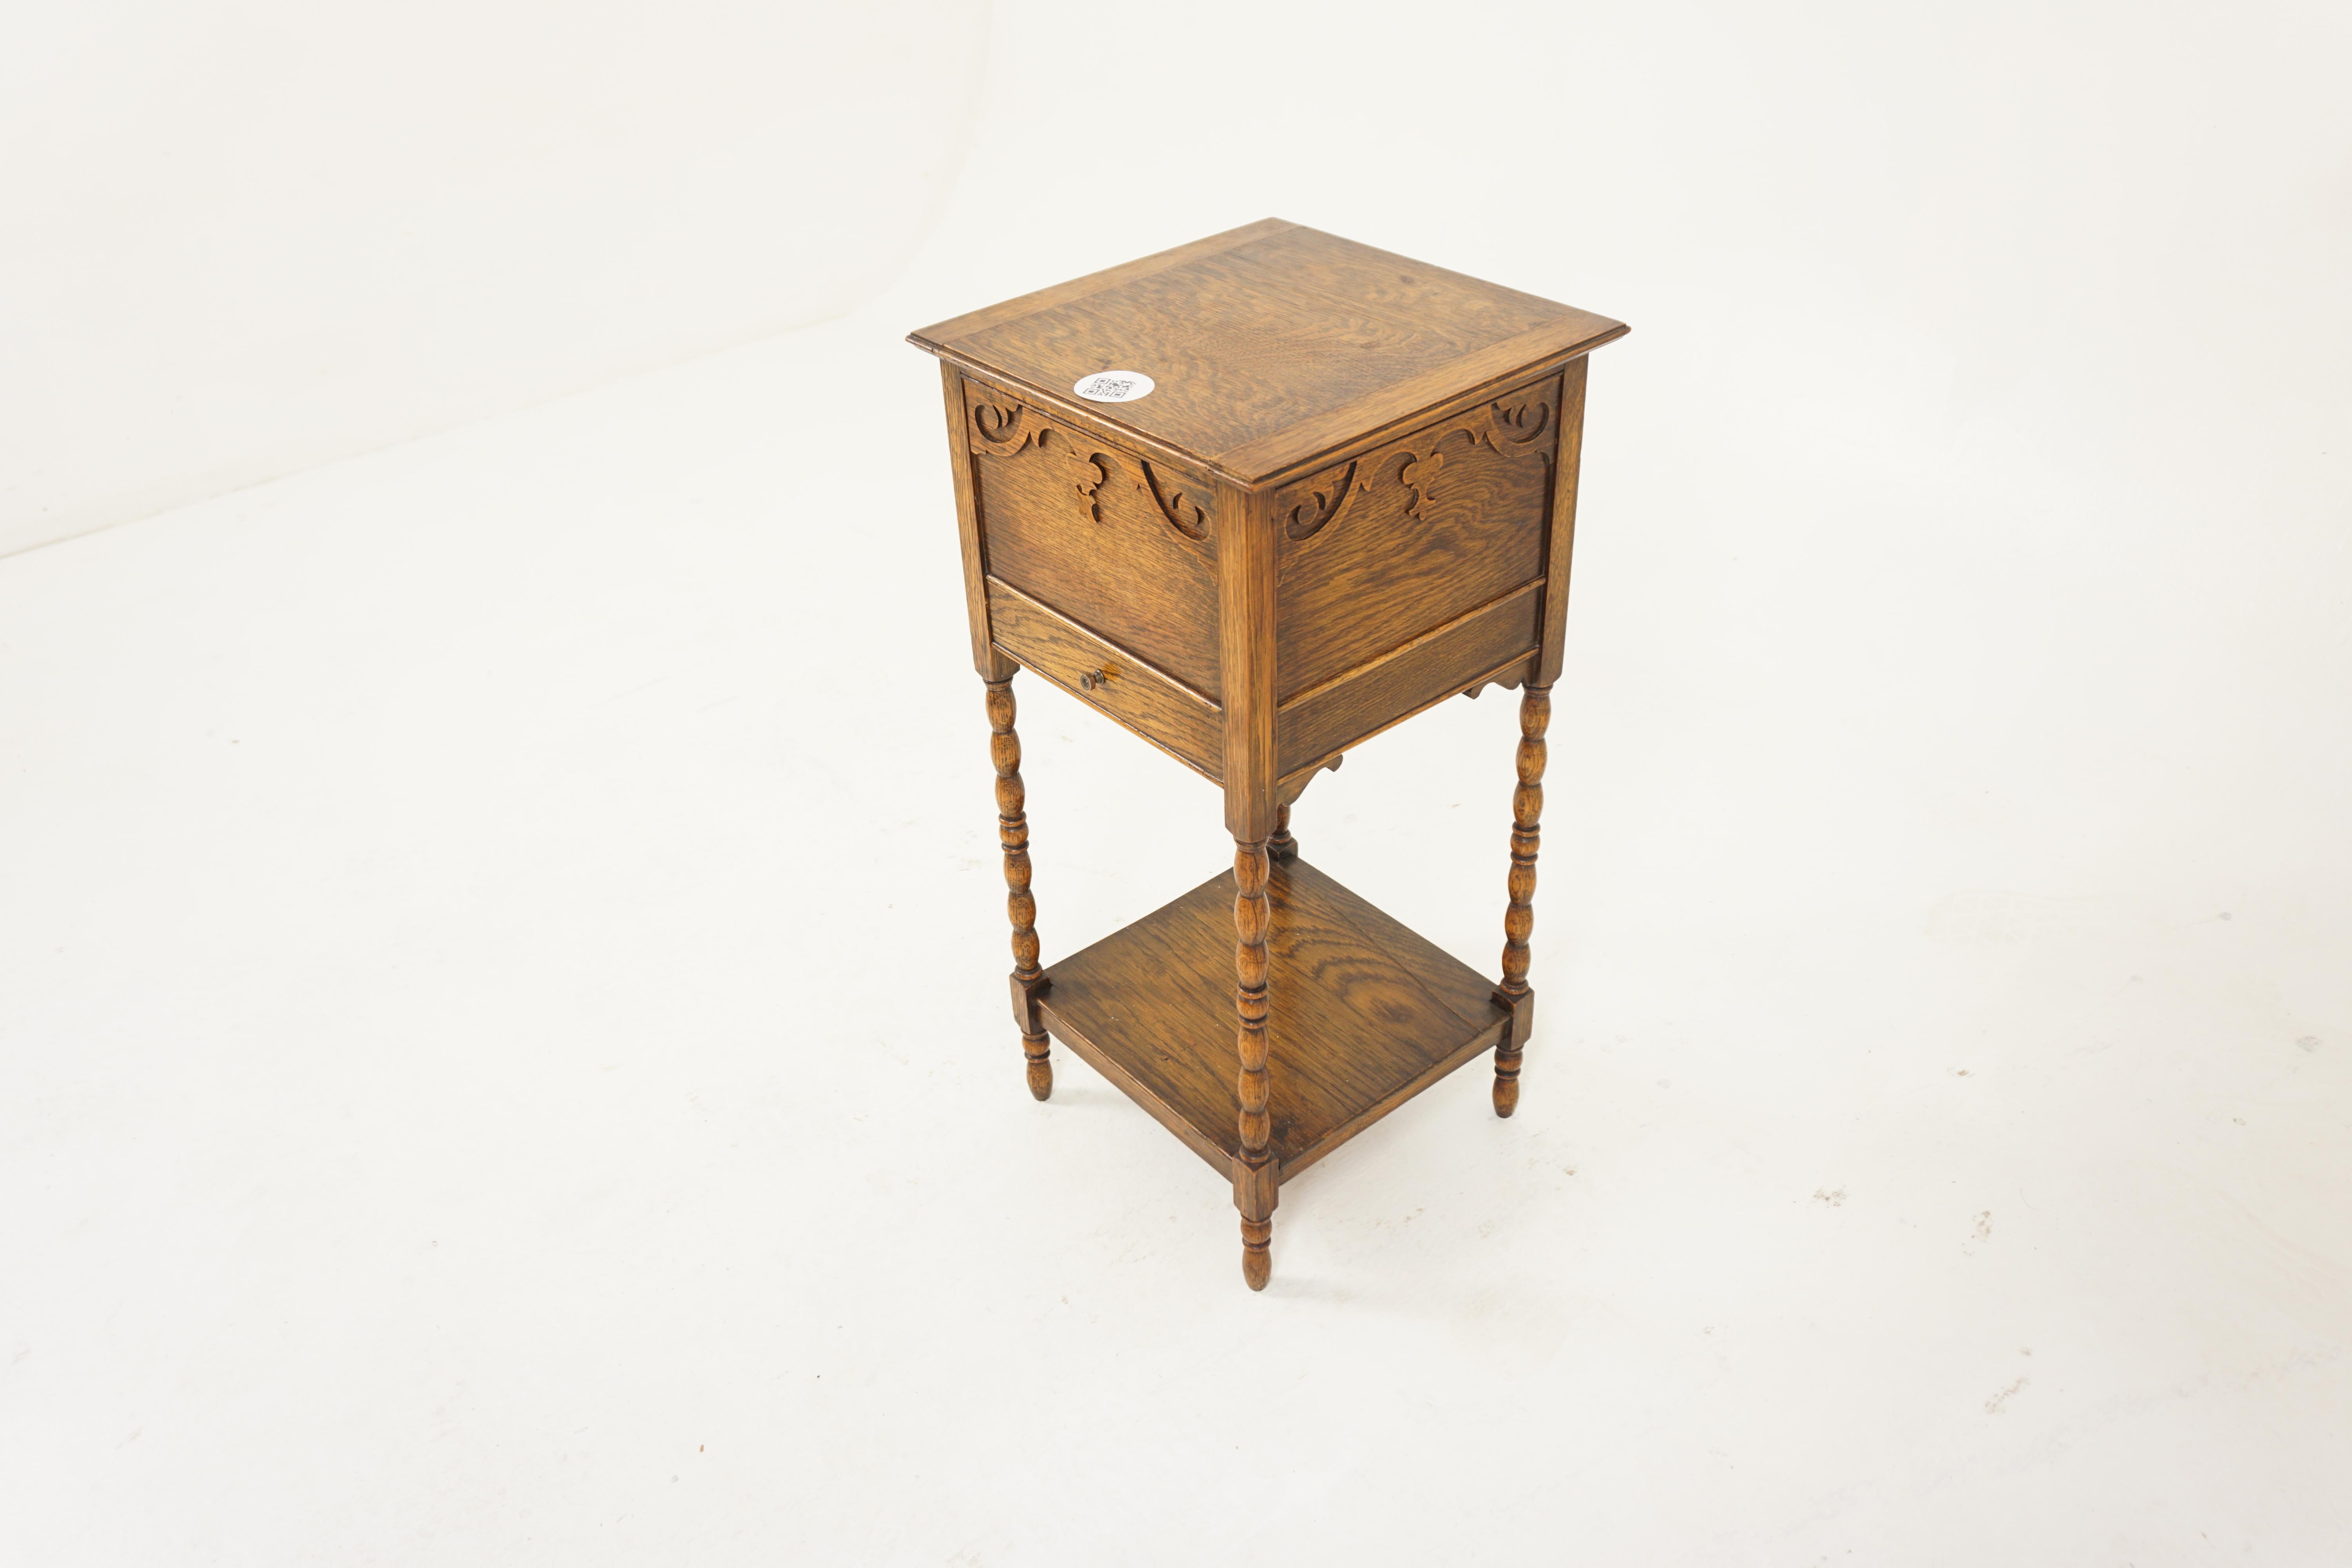 Antique tiger oak lift up sewing box, lamp table, planter, Scotland 1920, H793

Scotland 1920
Solid Oak
Original Finish
Square lift up oak top
Carved panel to the front and sides
Top opens up to reveal large storage space
Single drawer with